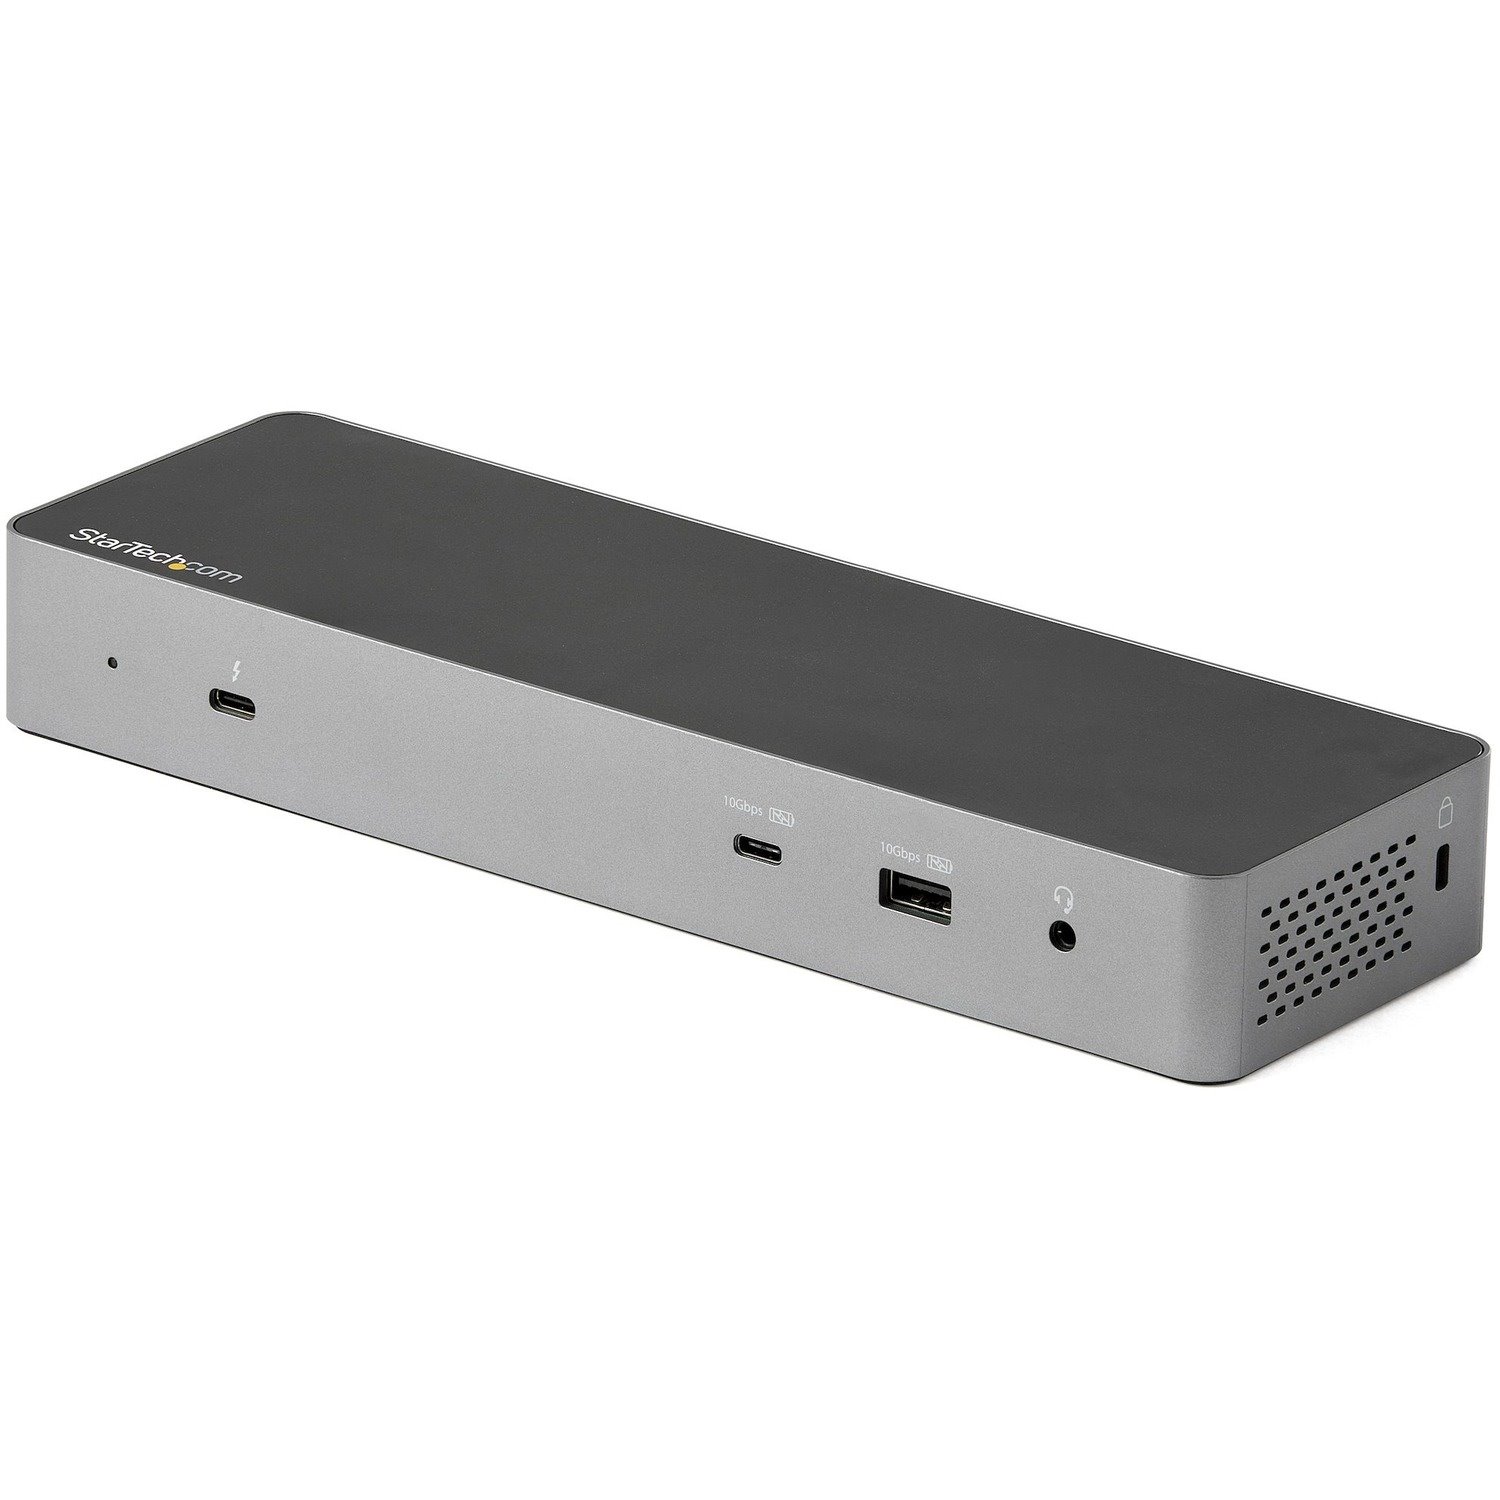 StarTech.com USB Type C, Thunderbolt 3 Docking Station for Monitor/Notebook/Workstation - 96 W - Black, Space Gray